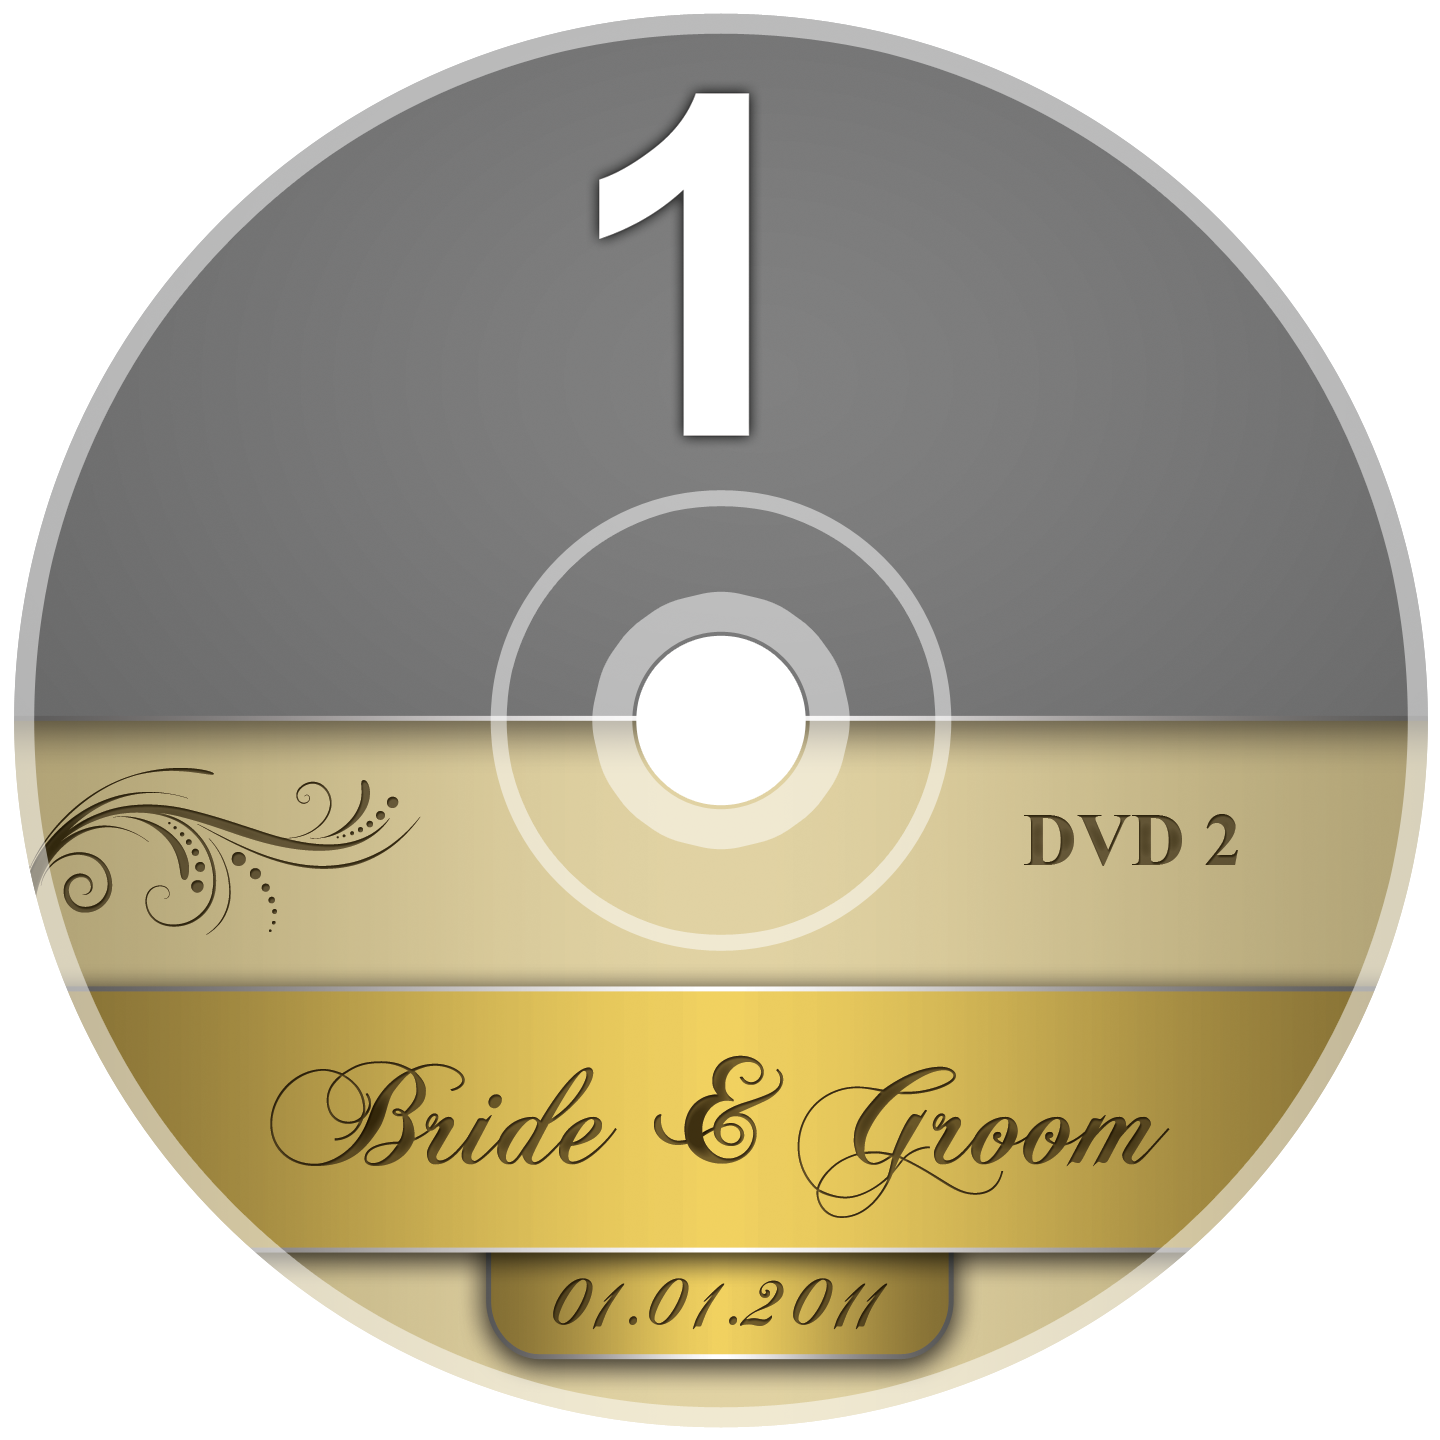 14-blu-ray-disc-psd-template-images-blu-ray-template-photoshop-cd